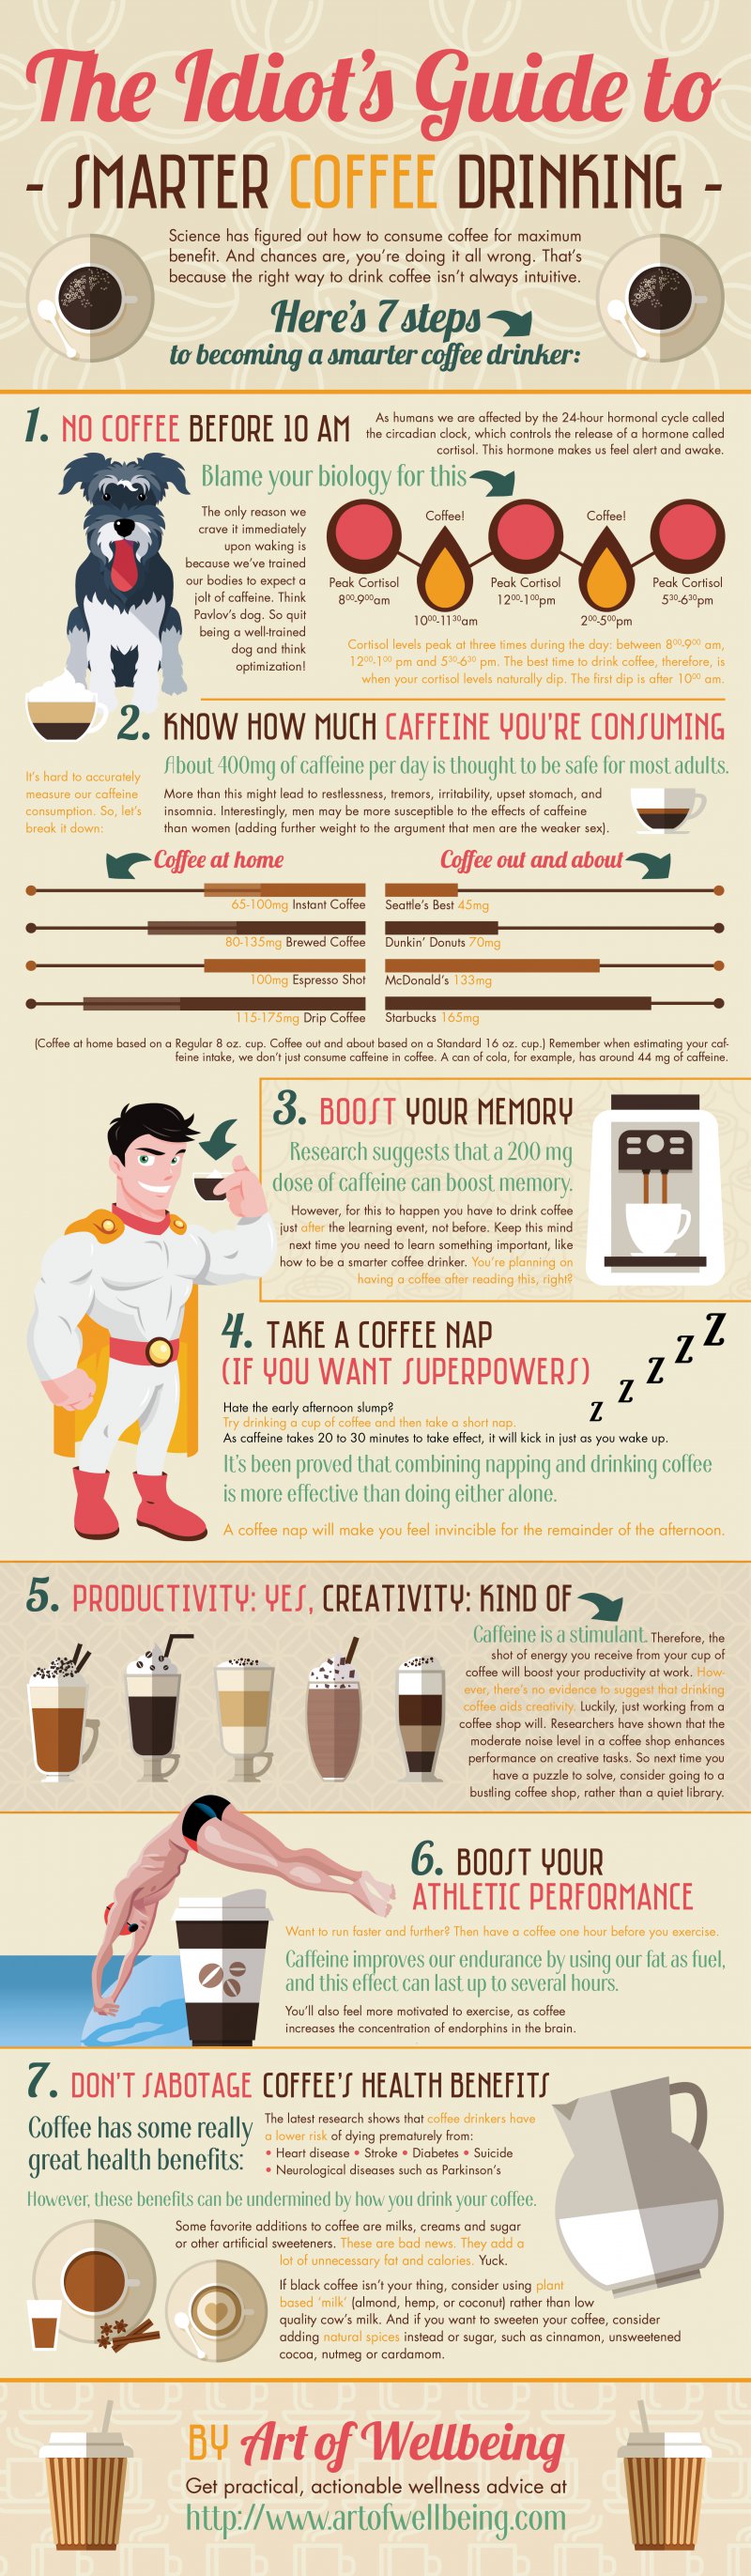 Idiots-guide-to-coffee-2